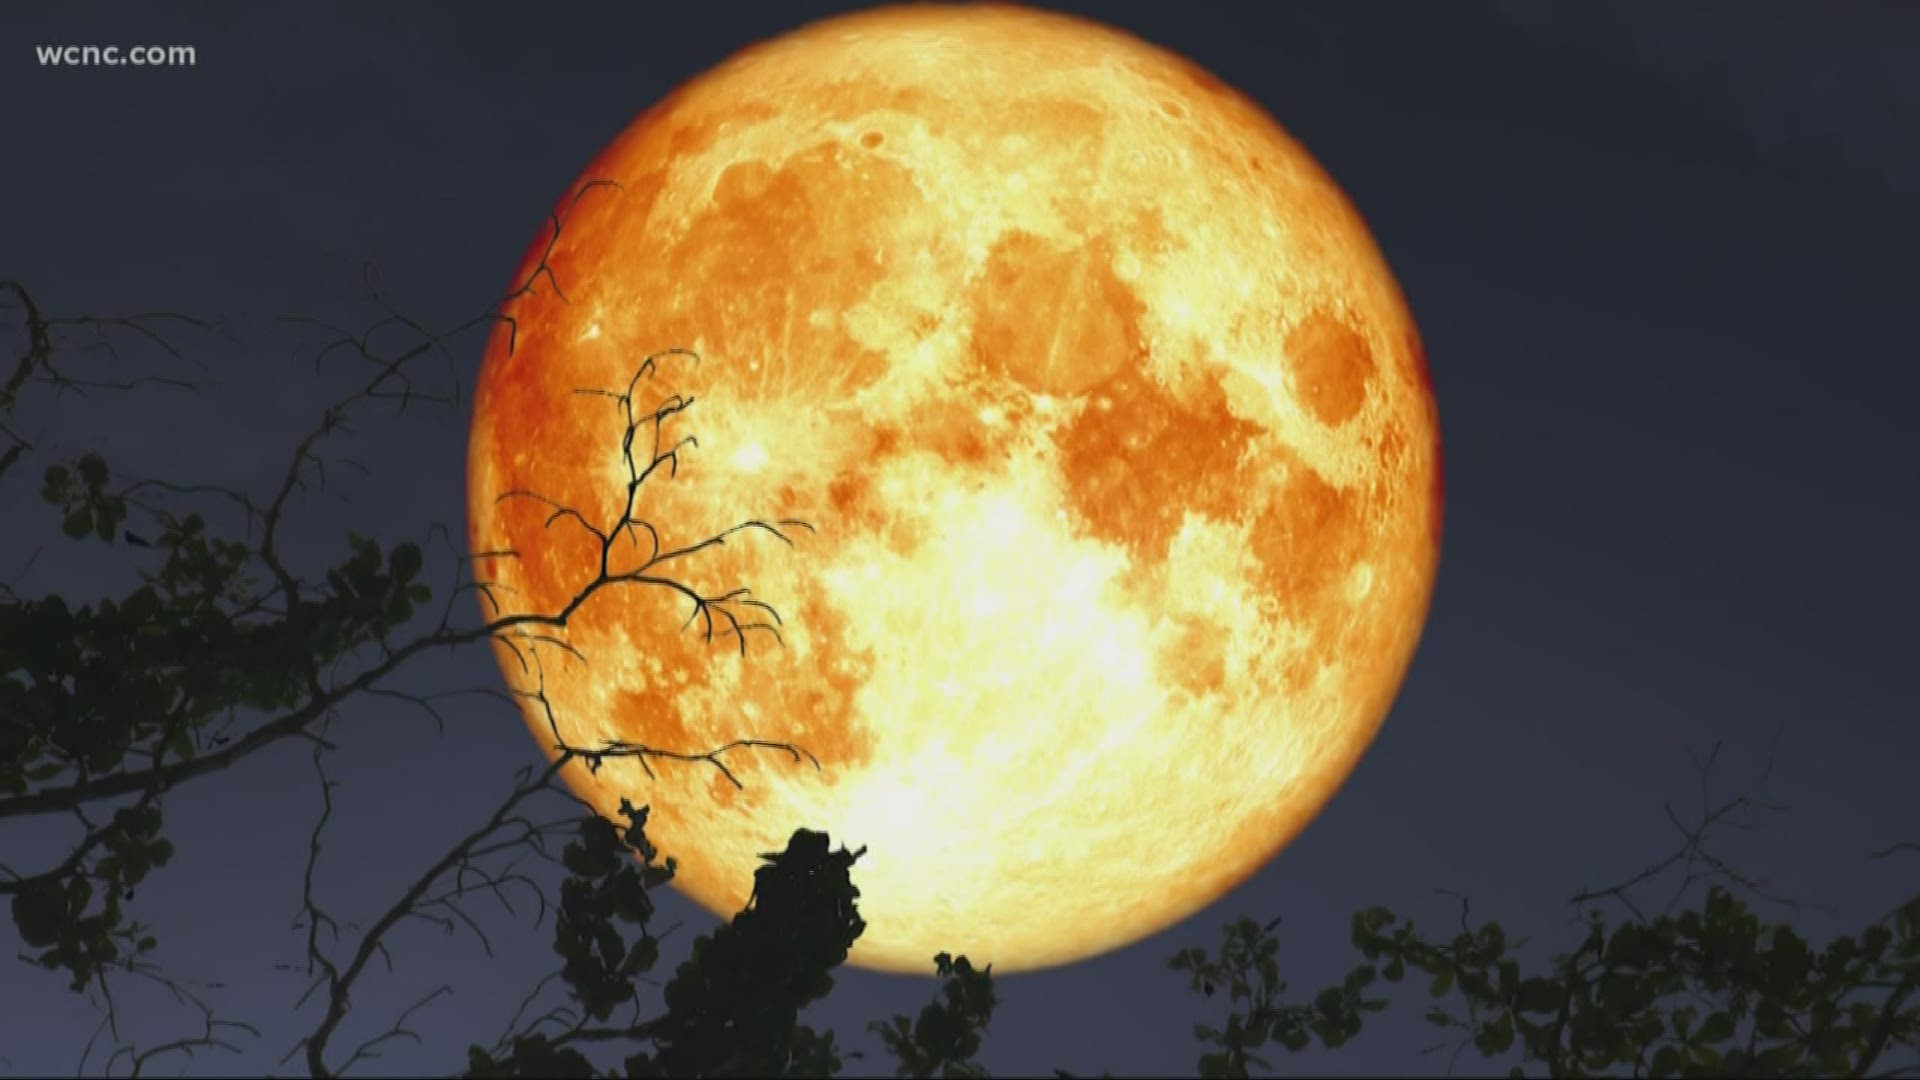 Not only is it Friday the 13th, there is a full moon. If it weirds you out a little bit, you're not alone. One-third of Americans admit to being superstitious.